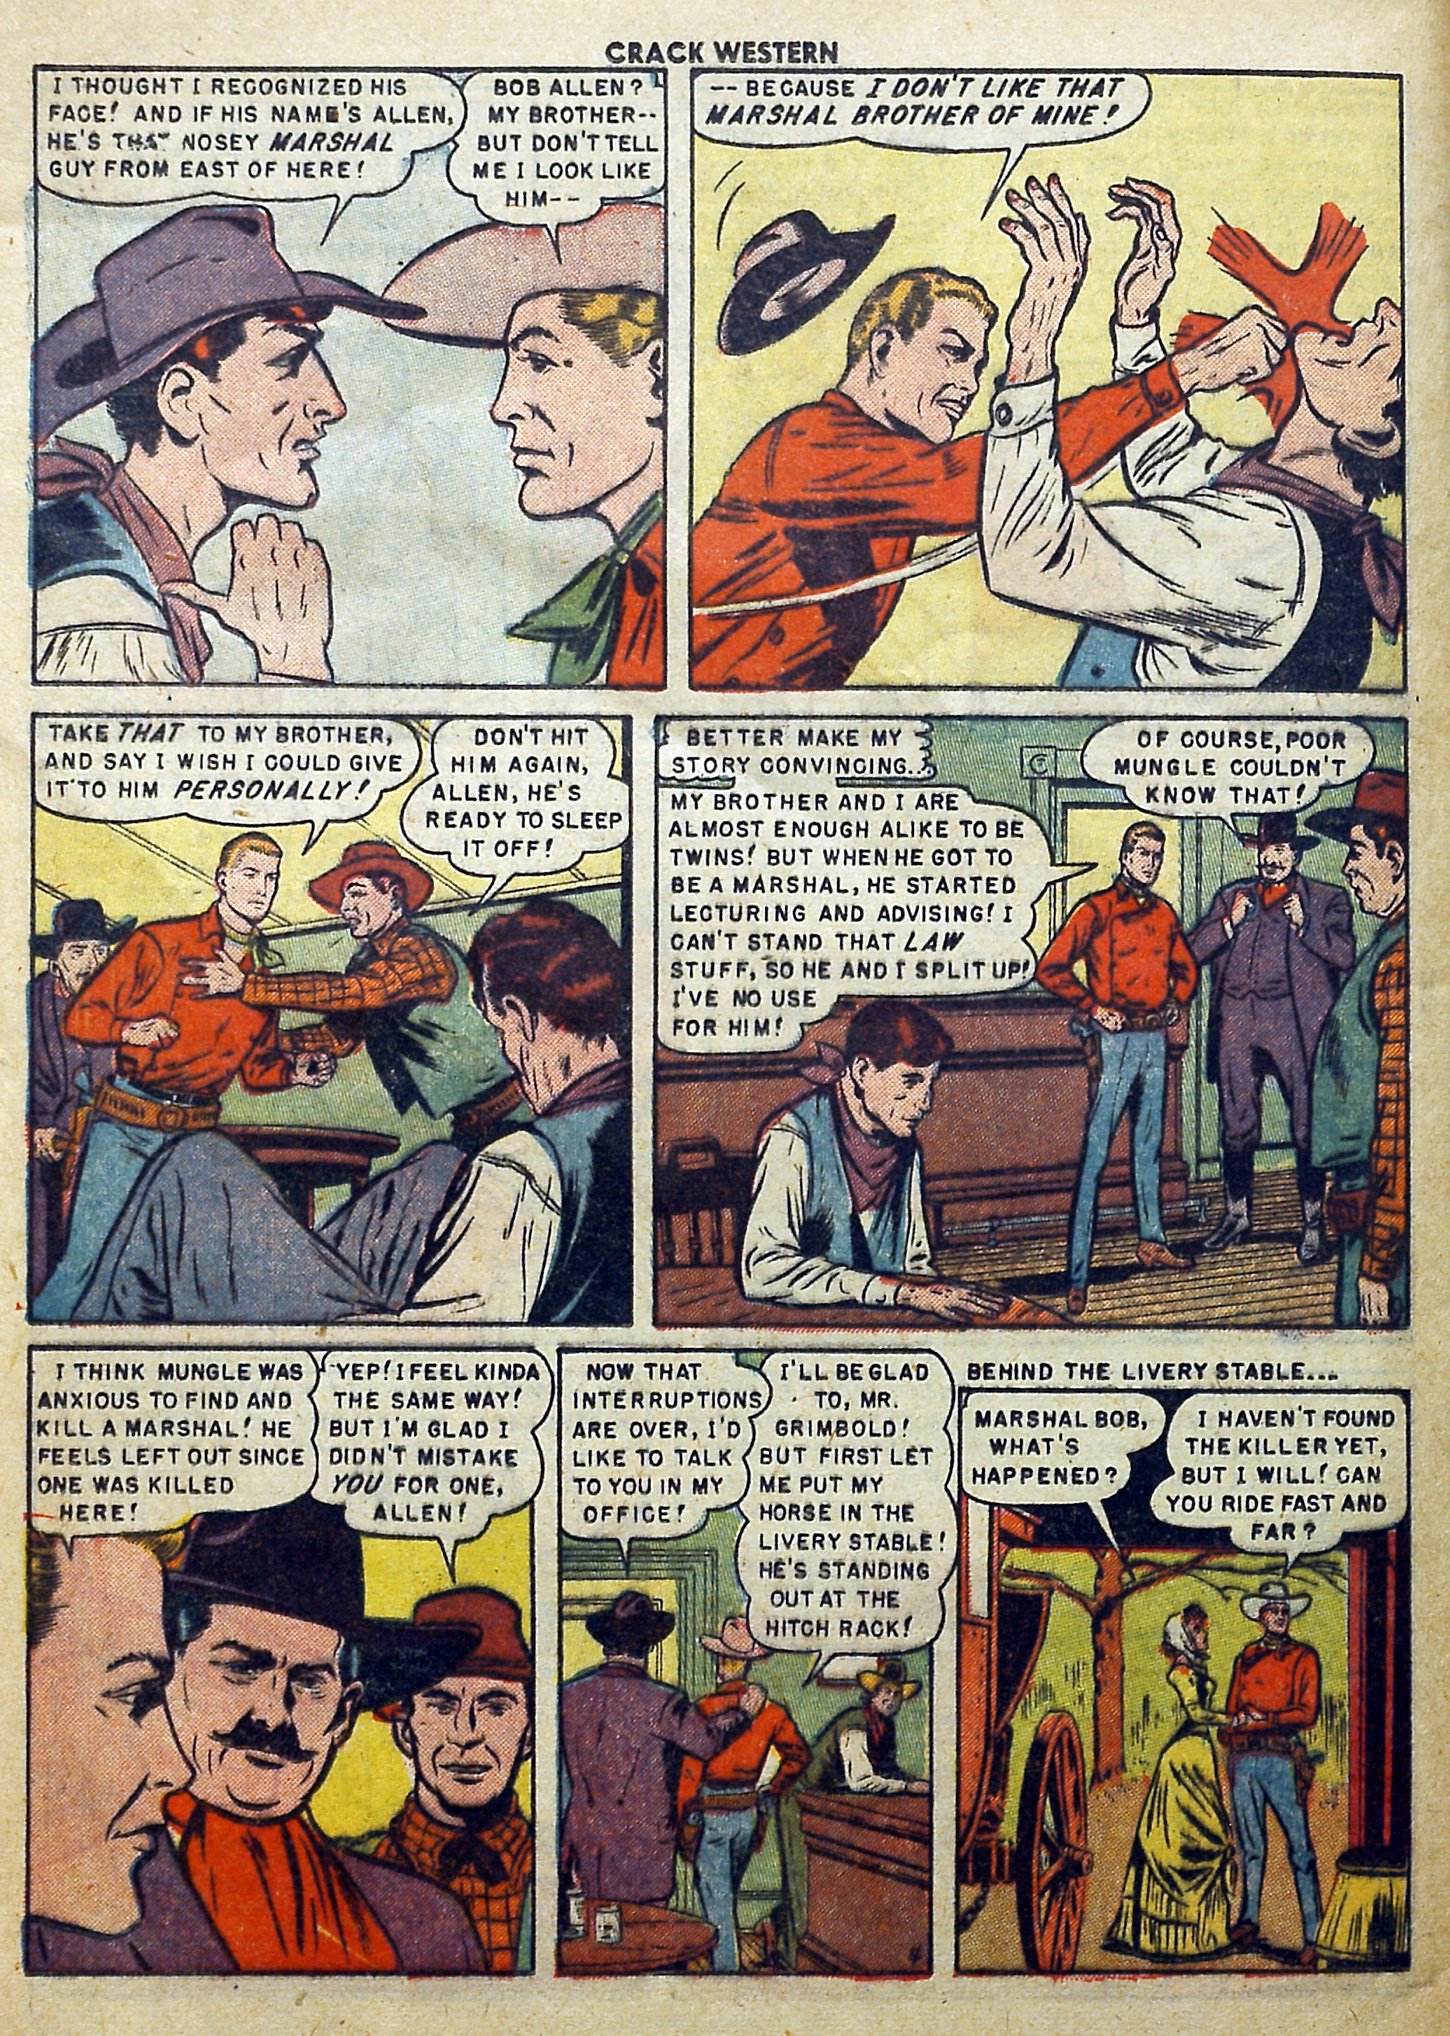 Read online Crack Western comic -  Issue #68 - 30